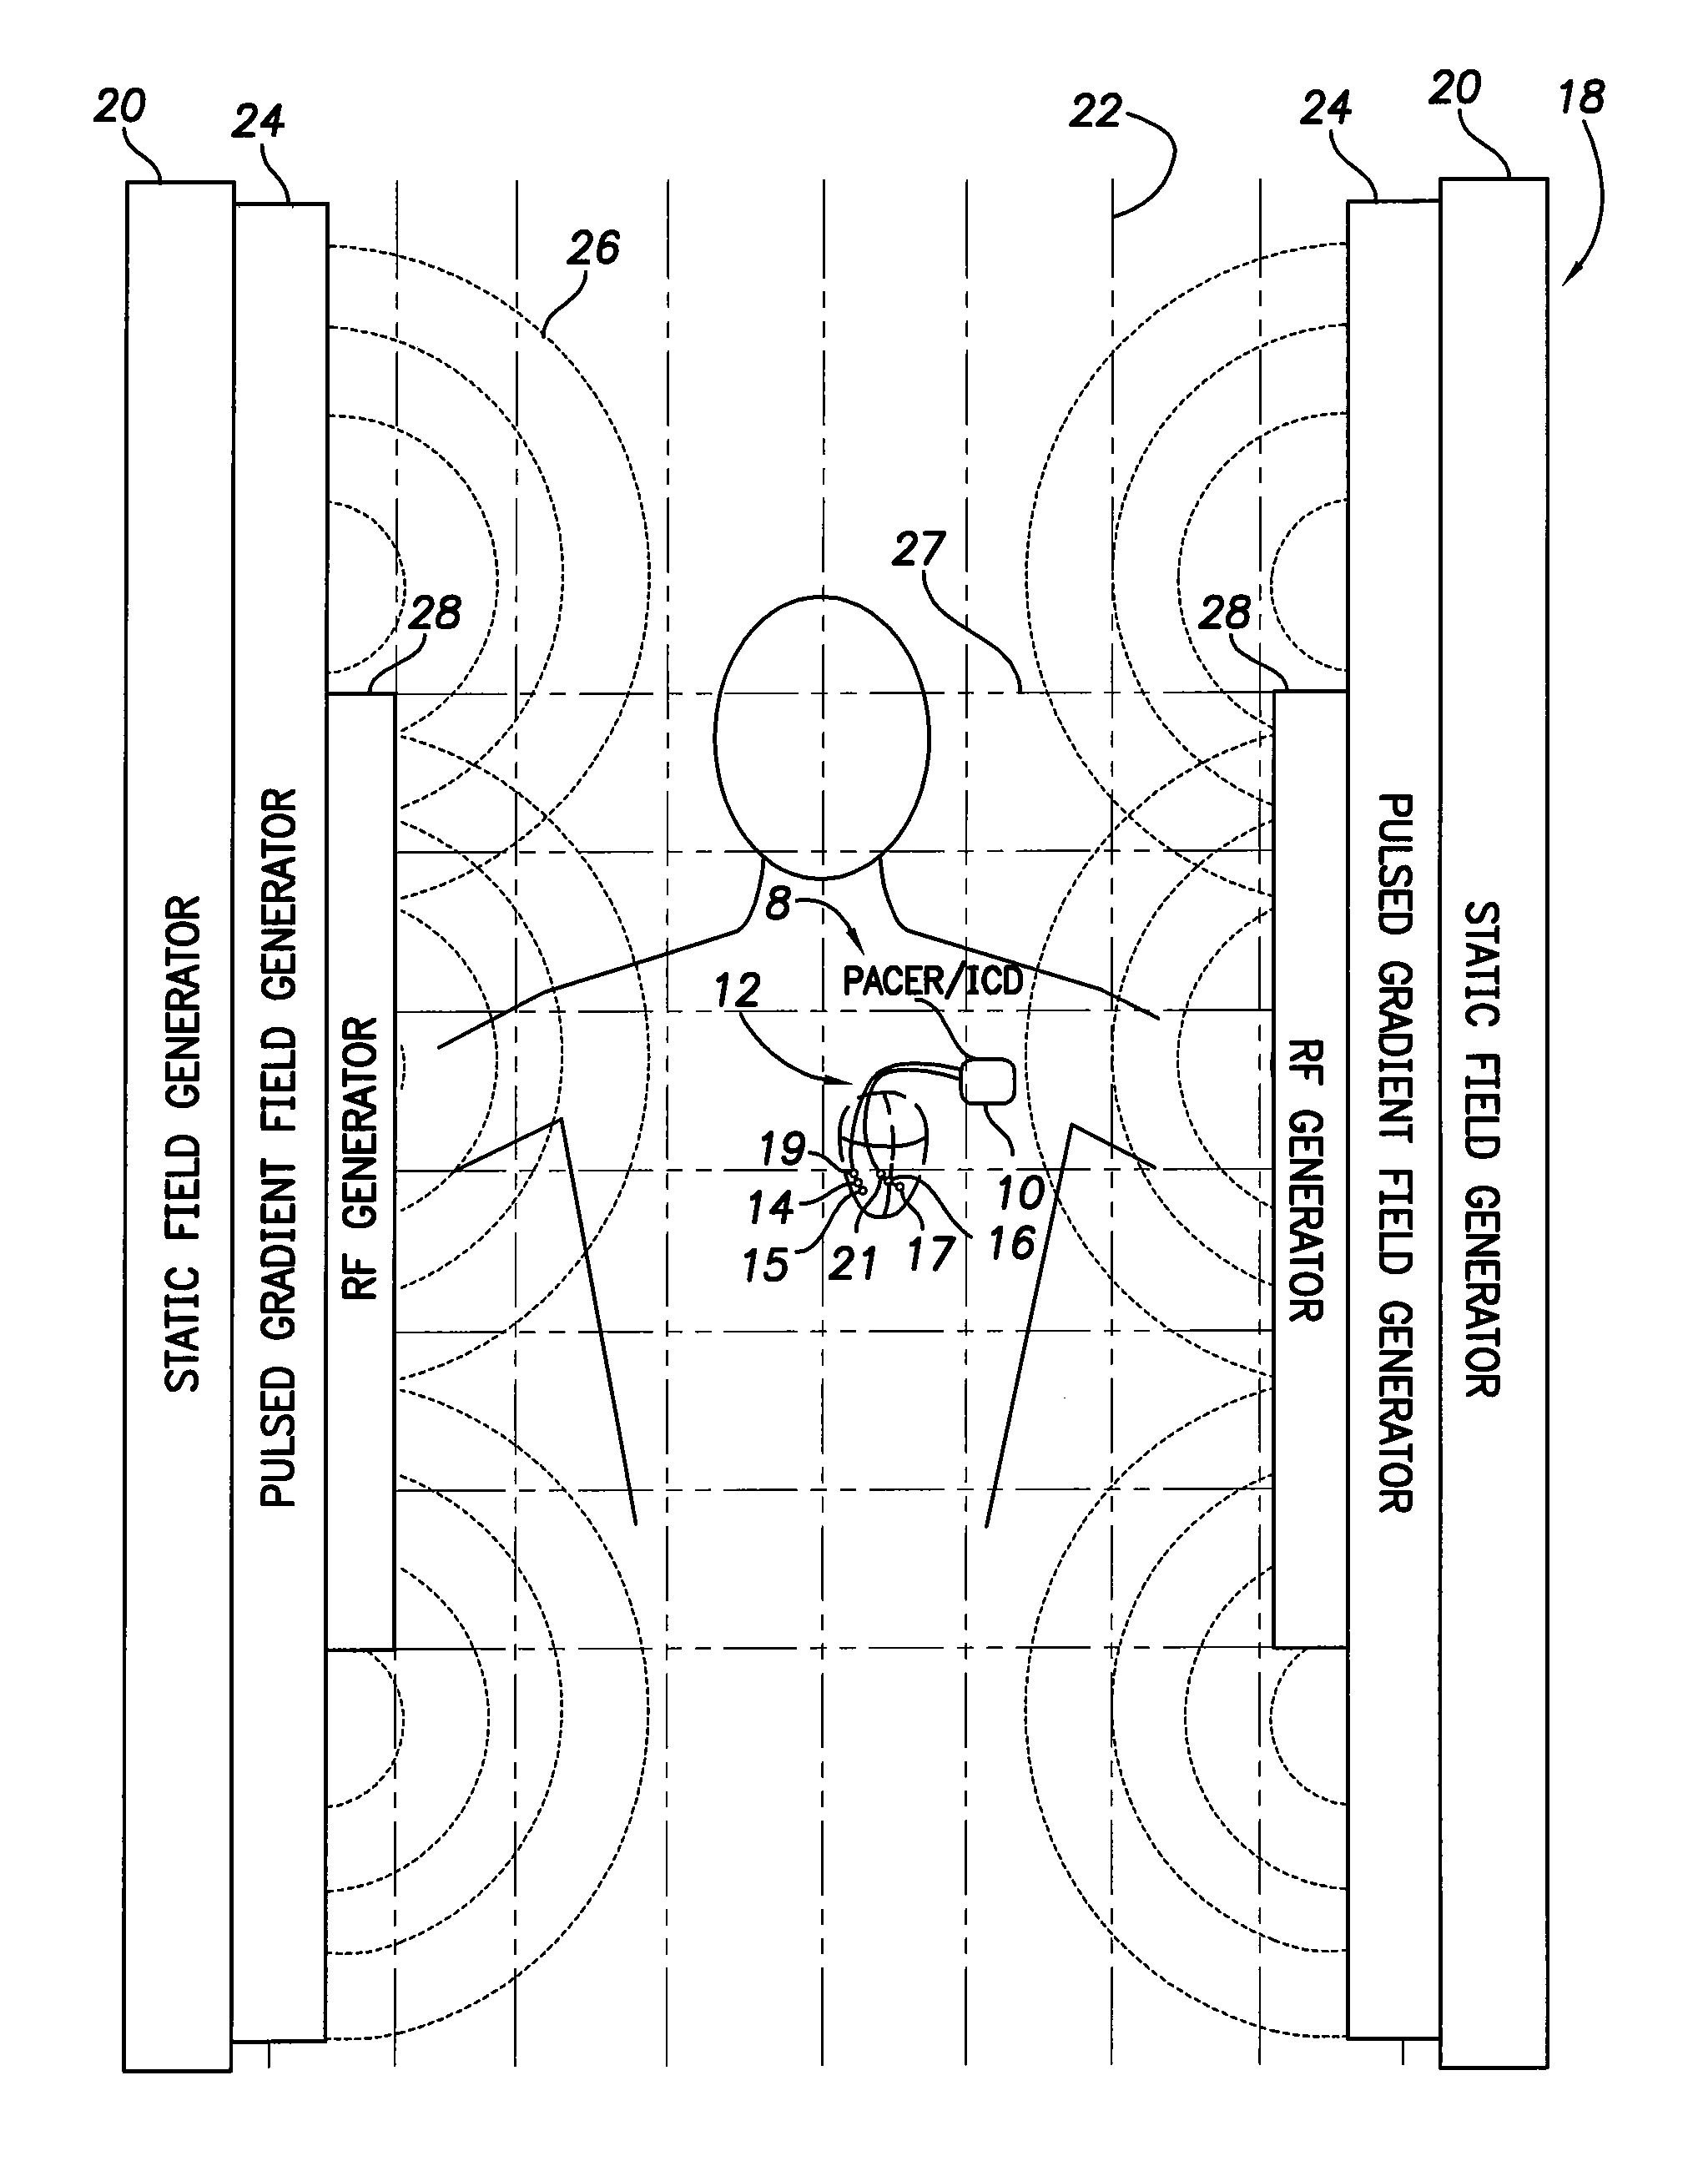 Systems and methods for exploiting the tip or ring conductor of an implantable medical device lead during an MRI to reduce lead heating and the risks of MRI-induced stimulation